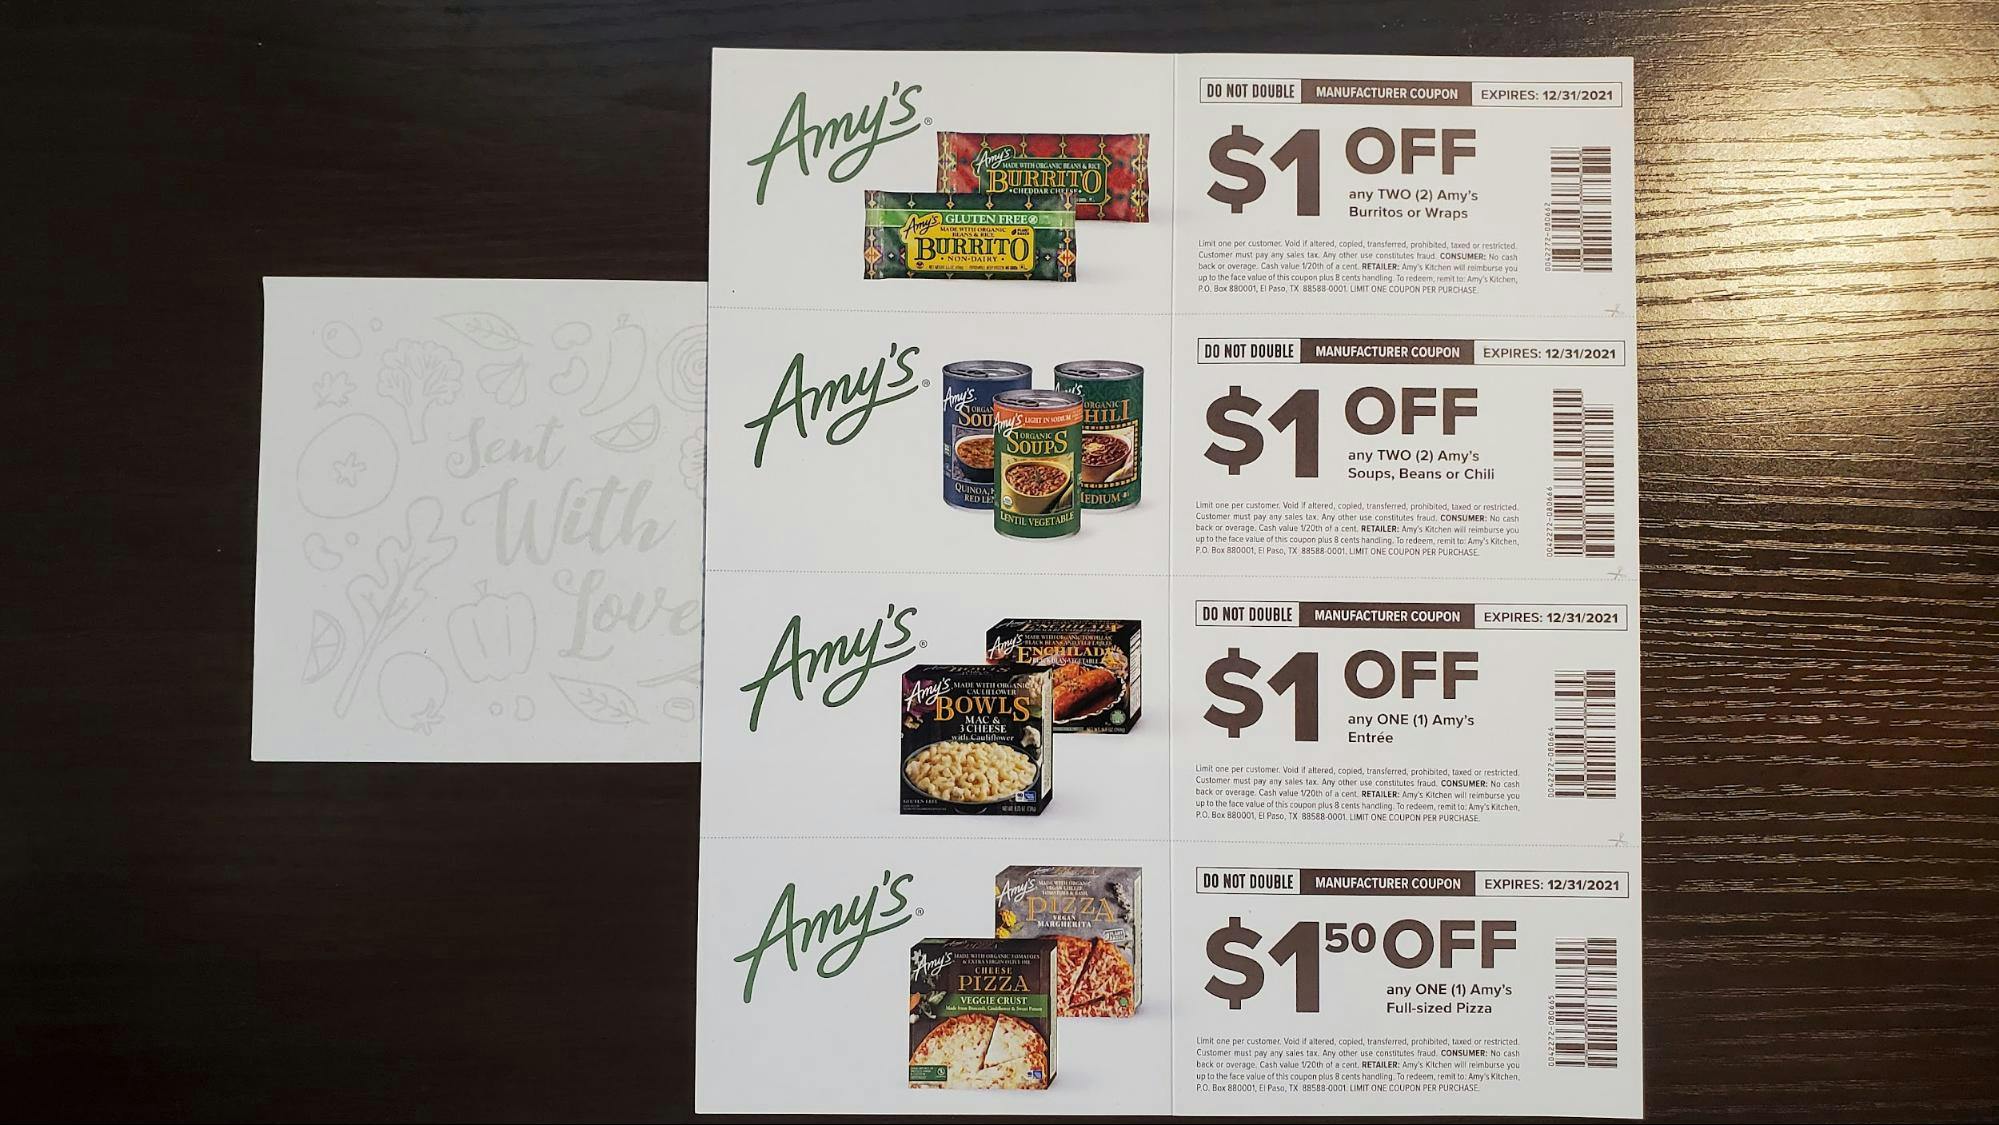 Free Amy's coupons by mail